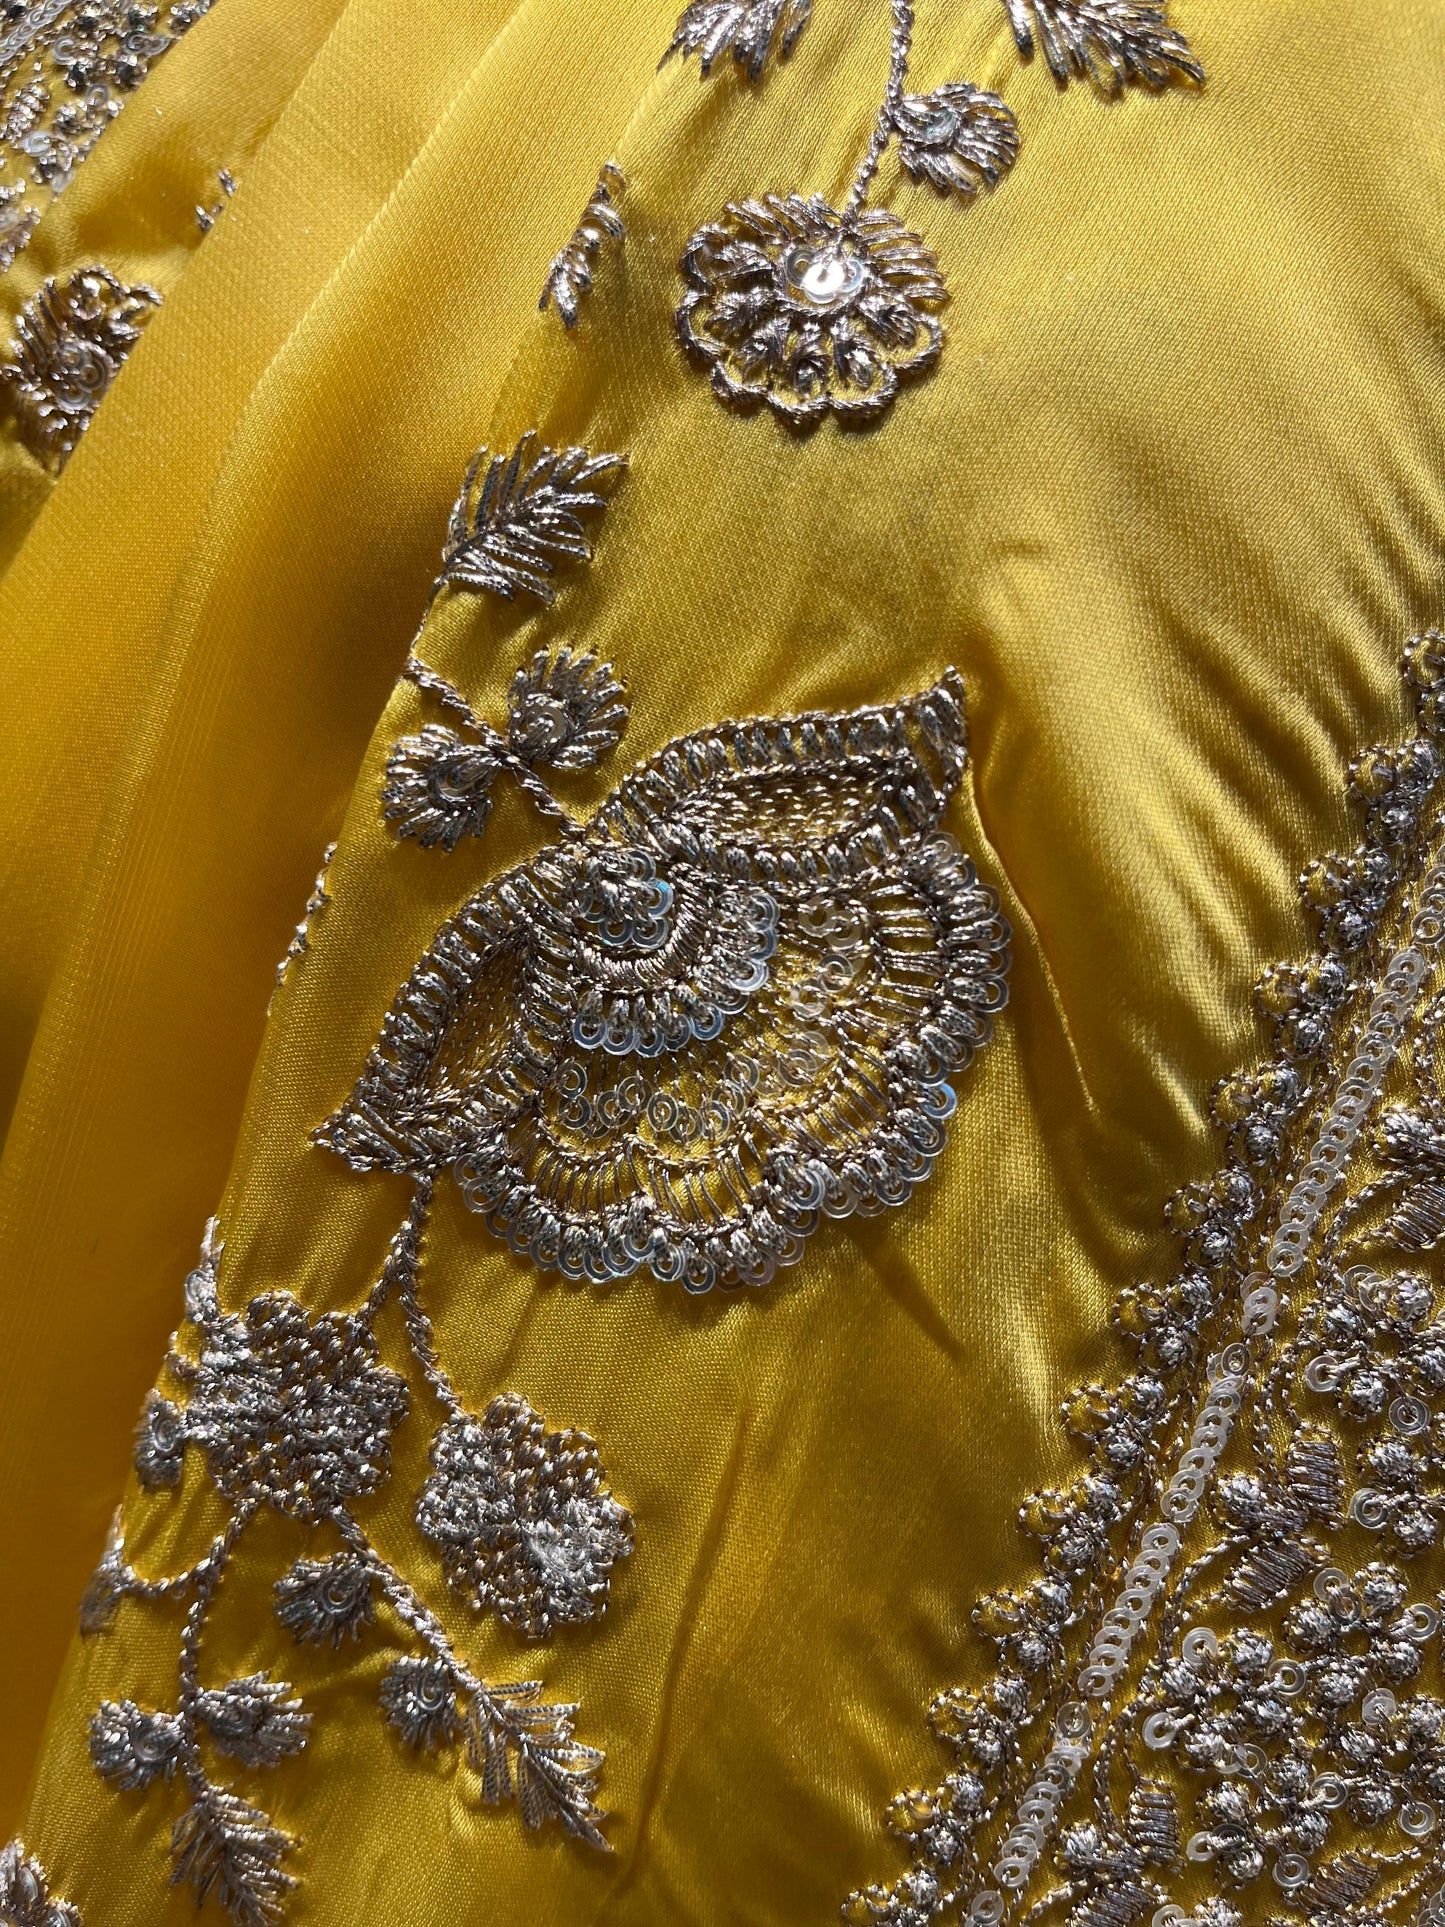 ( DELIVERY IN 25 DAYS ) YELLOW COLOUR ORGANZA EMBROIDERED SAREE EMBELLISHED WITH ZARI WORK